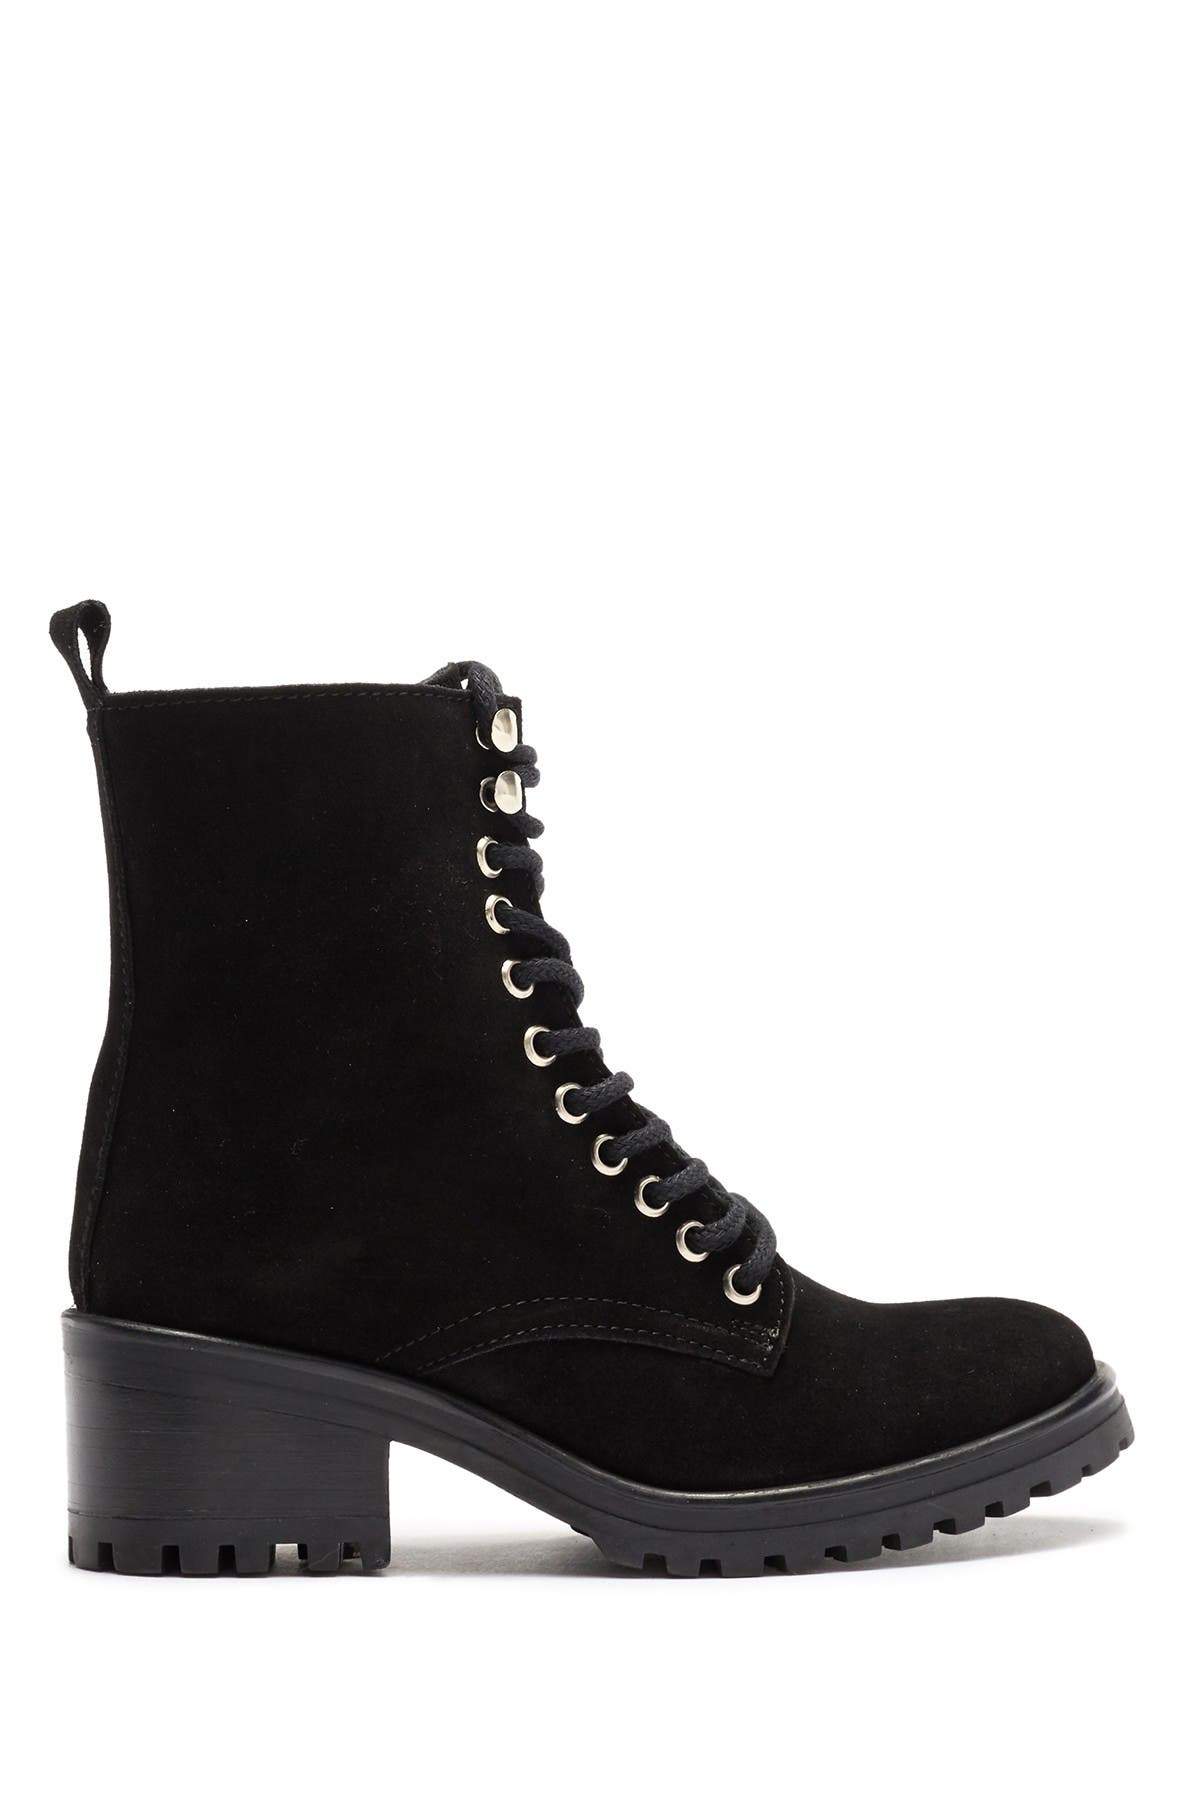 steve madden lace up combat boots